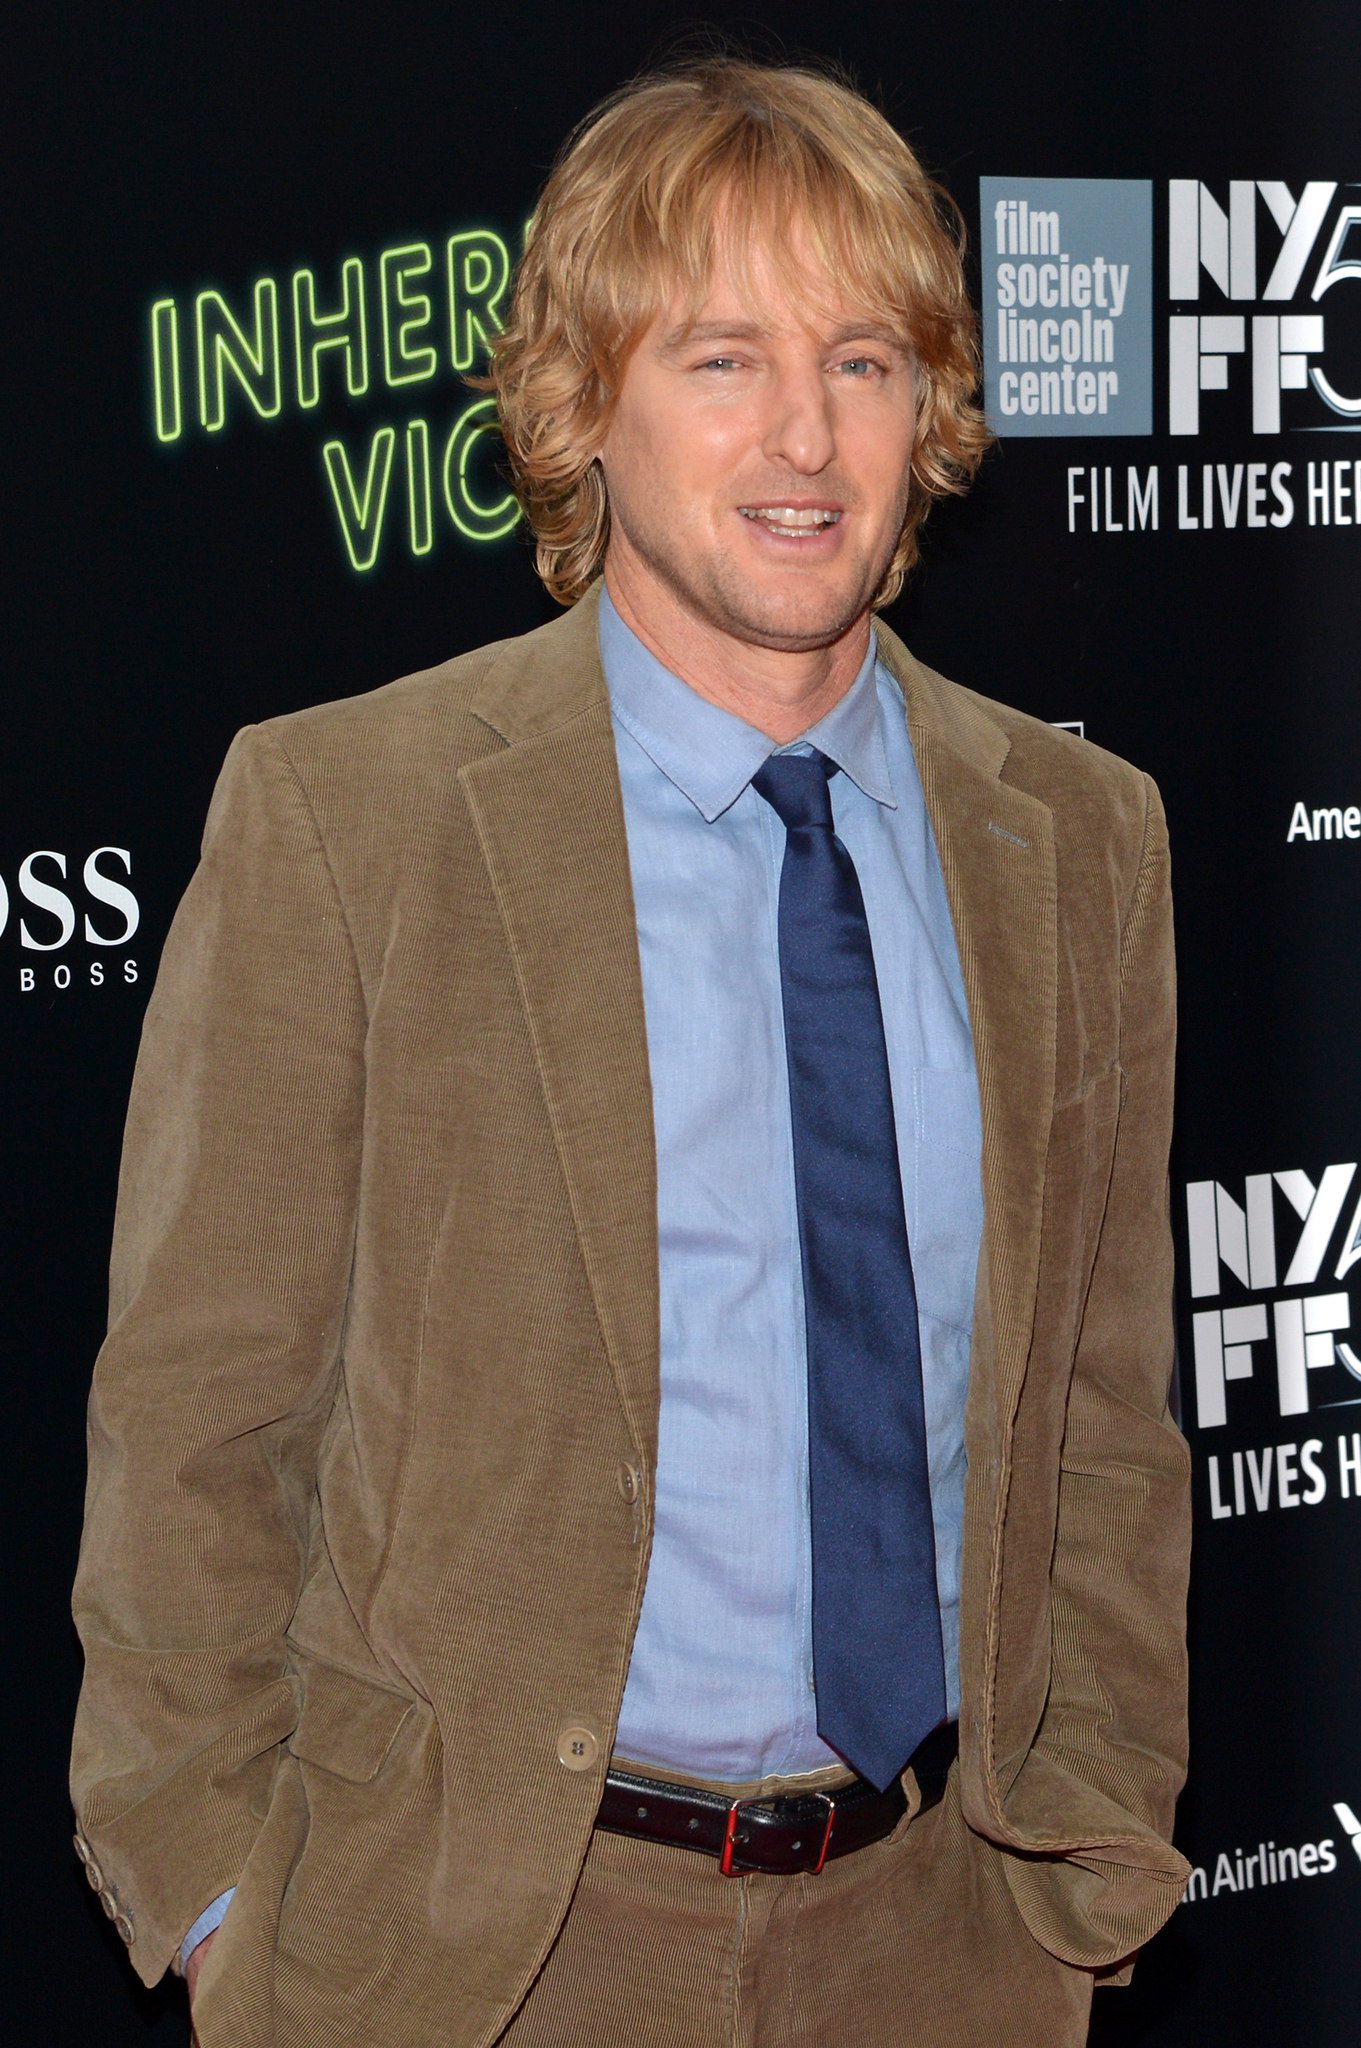 Owen Wilson at event of Zmogiska silpnybe (2014)